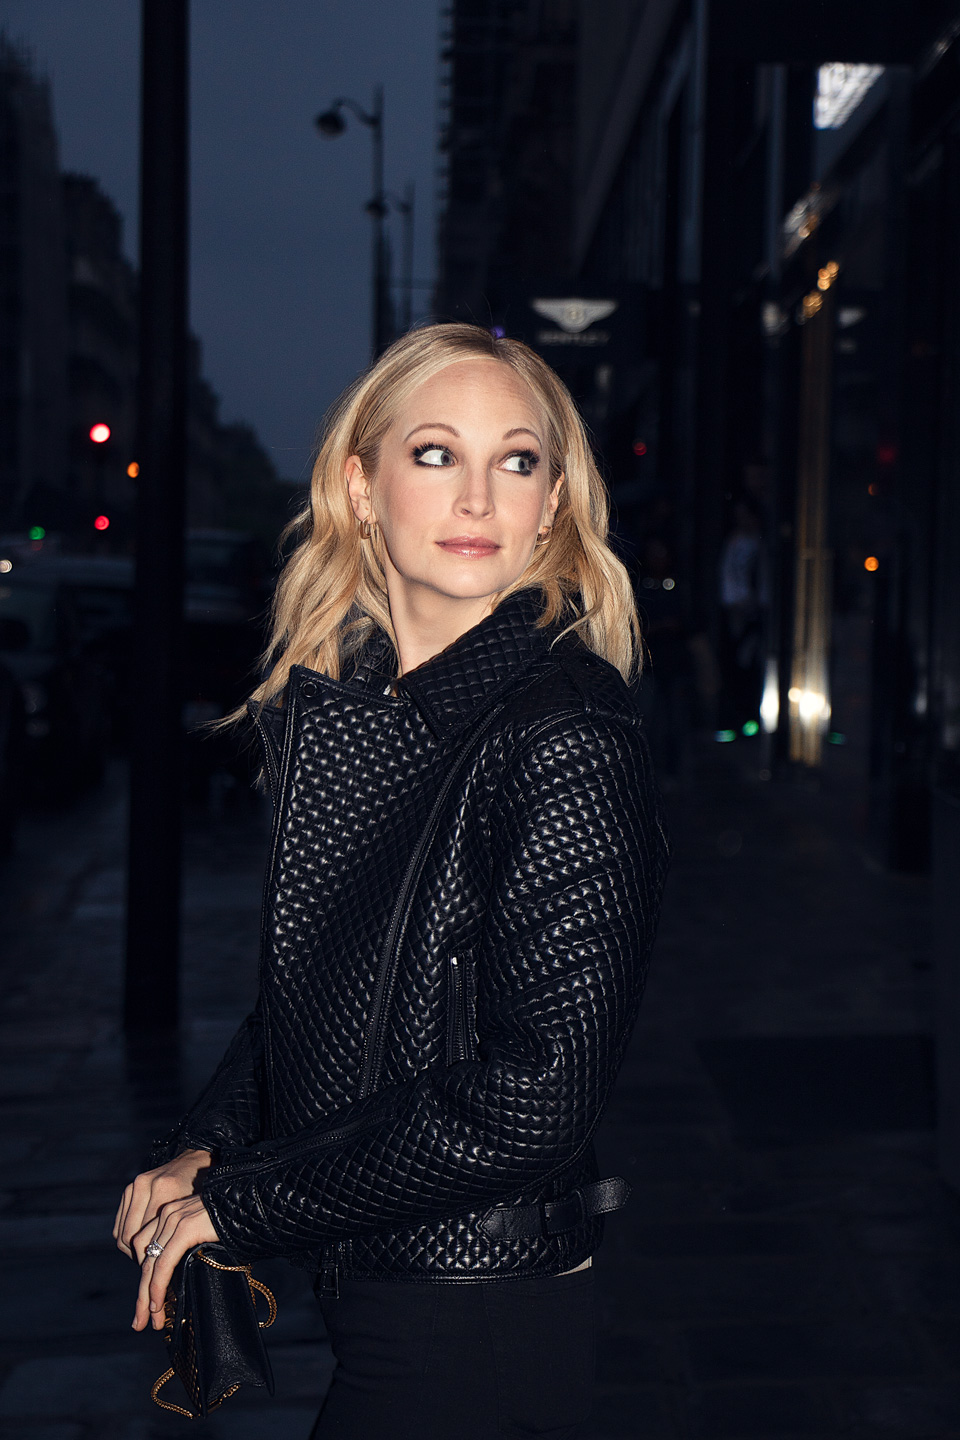 French Photographer Portrait Photography Candice King / Vampire Diaries & The Originals